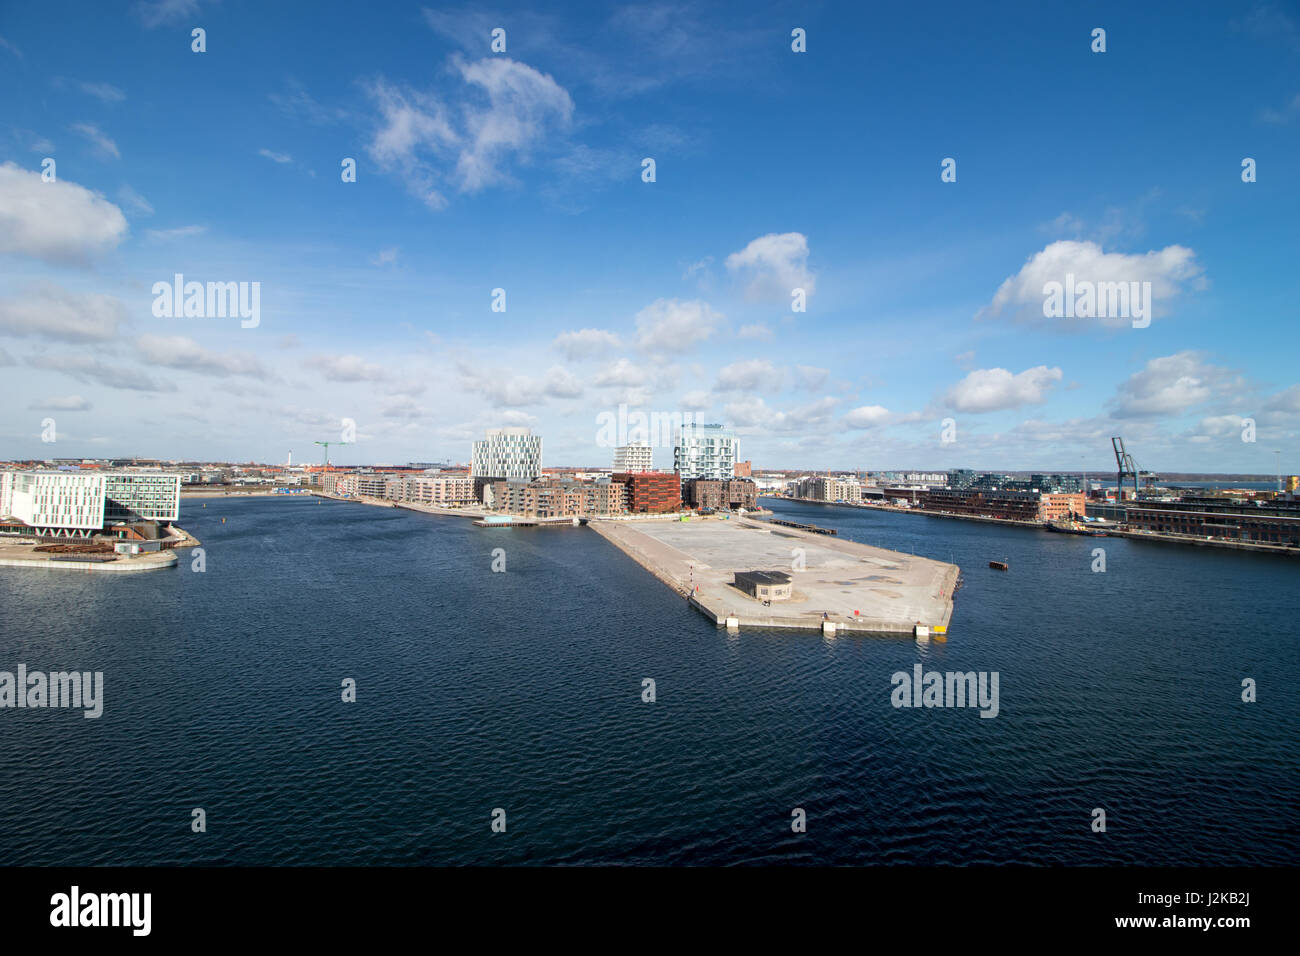 Copenhagen, the capital of Denmark. The picture is taken in the Nordhavn/Osterport area, in the north-eastern part of the city. Wide angle view. Stock Photo